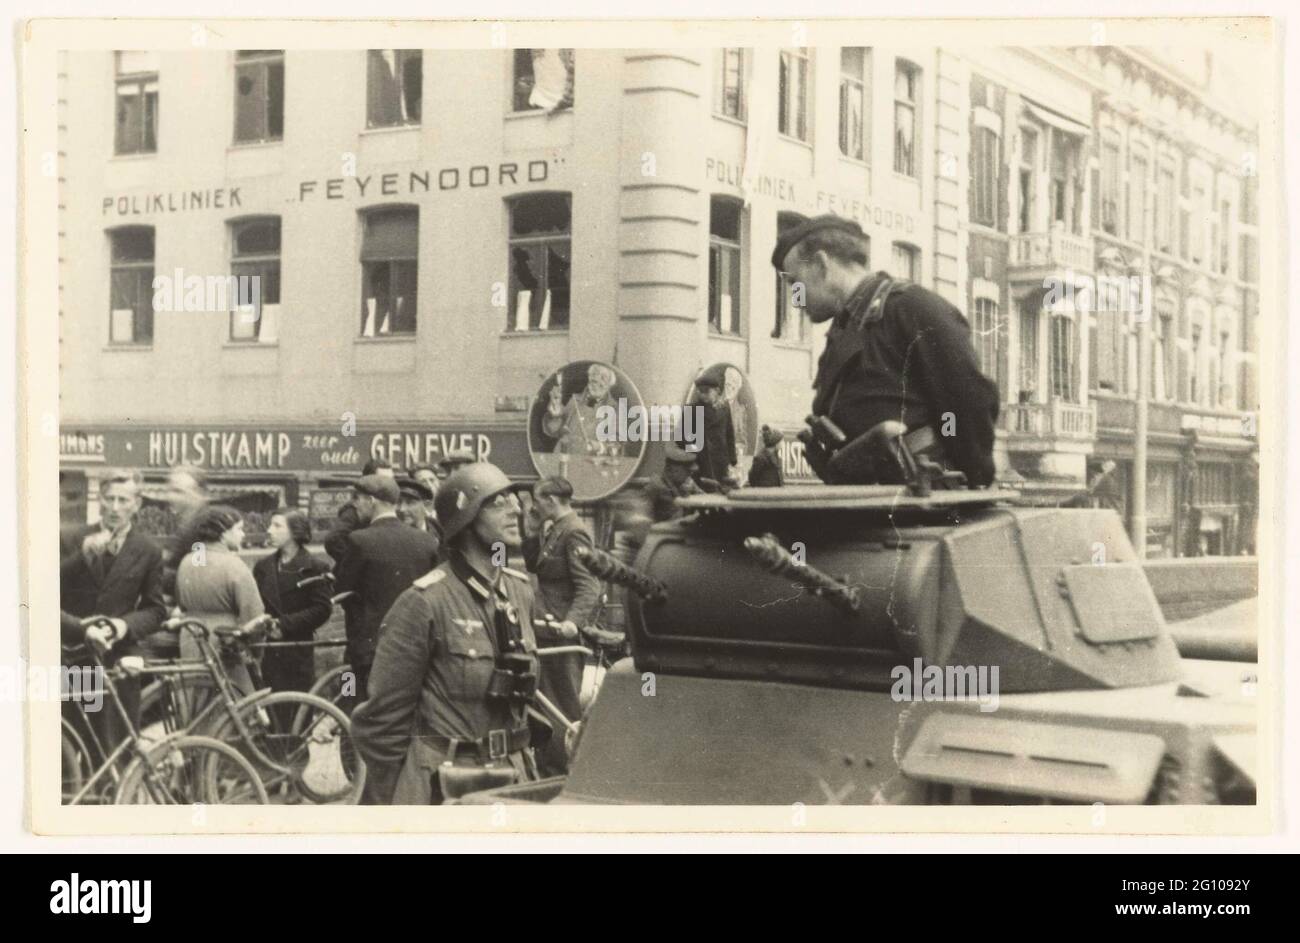 German army in Rotterdam. German Wehrmacht soldiers, one in a tank with a cap and binoculars, talk to each other on the street in Rotterdam South. The one left has a helmet, wears glasses and binoculars around his neck. The Feyenoord clinic can be seen in the background. To the right are Dutch, with cycling, talking. It would be German tanks of the 9th Armored Division that make contact with the men's men's men's men. The photo is probably made around the capitulation of the Netherlands on May 15, 1940. Stock Photo